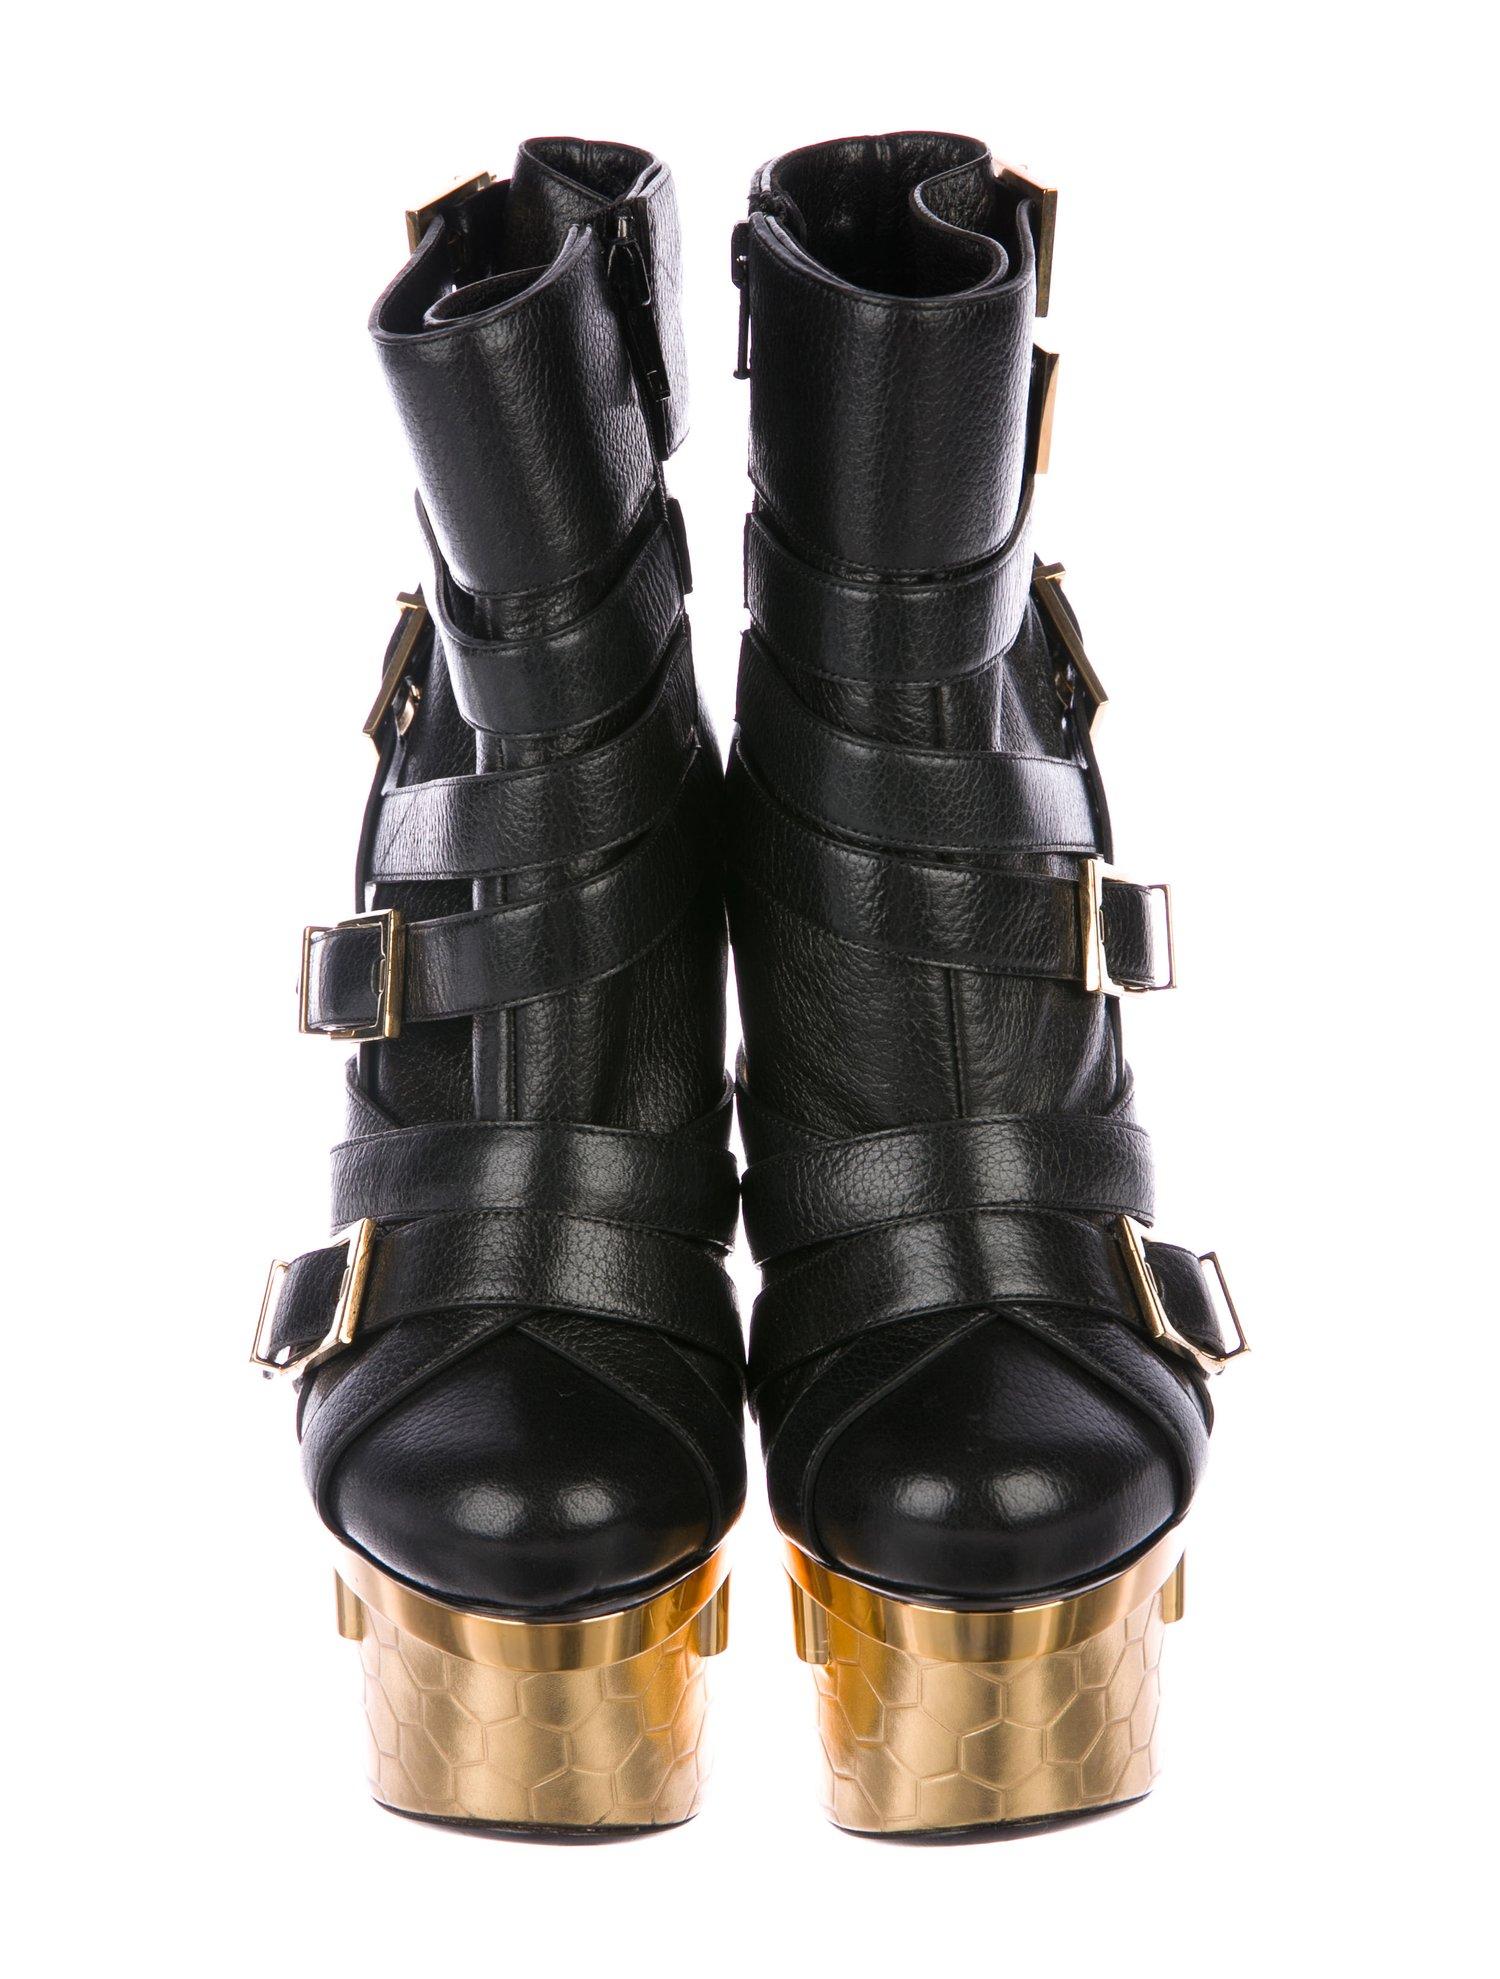 Versace NEW Runway Black Leather Gold Buckle Ankle Boots Booties in Box

Size IT 36
Leather
Metal
Resin
Gold tone
Buckle and zip closures
Made in Italy
Platform 2.75